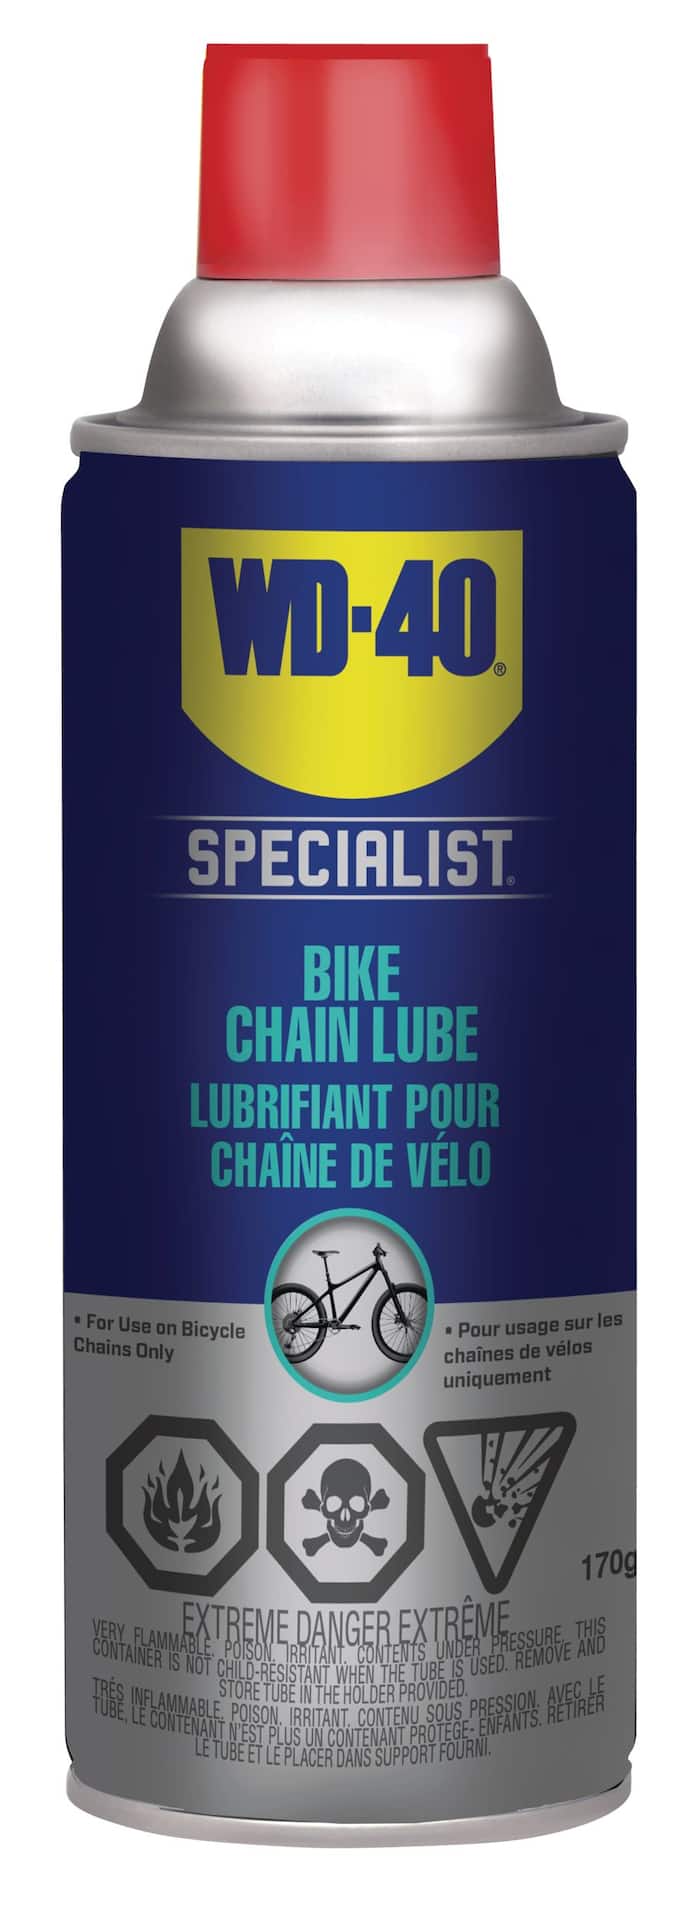 wd 40 bike all condition lube 03b91601 0089 4901 8d45 d8f3a4d274bf jpgrendition